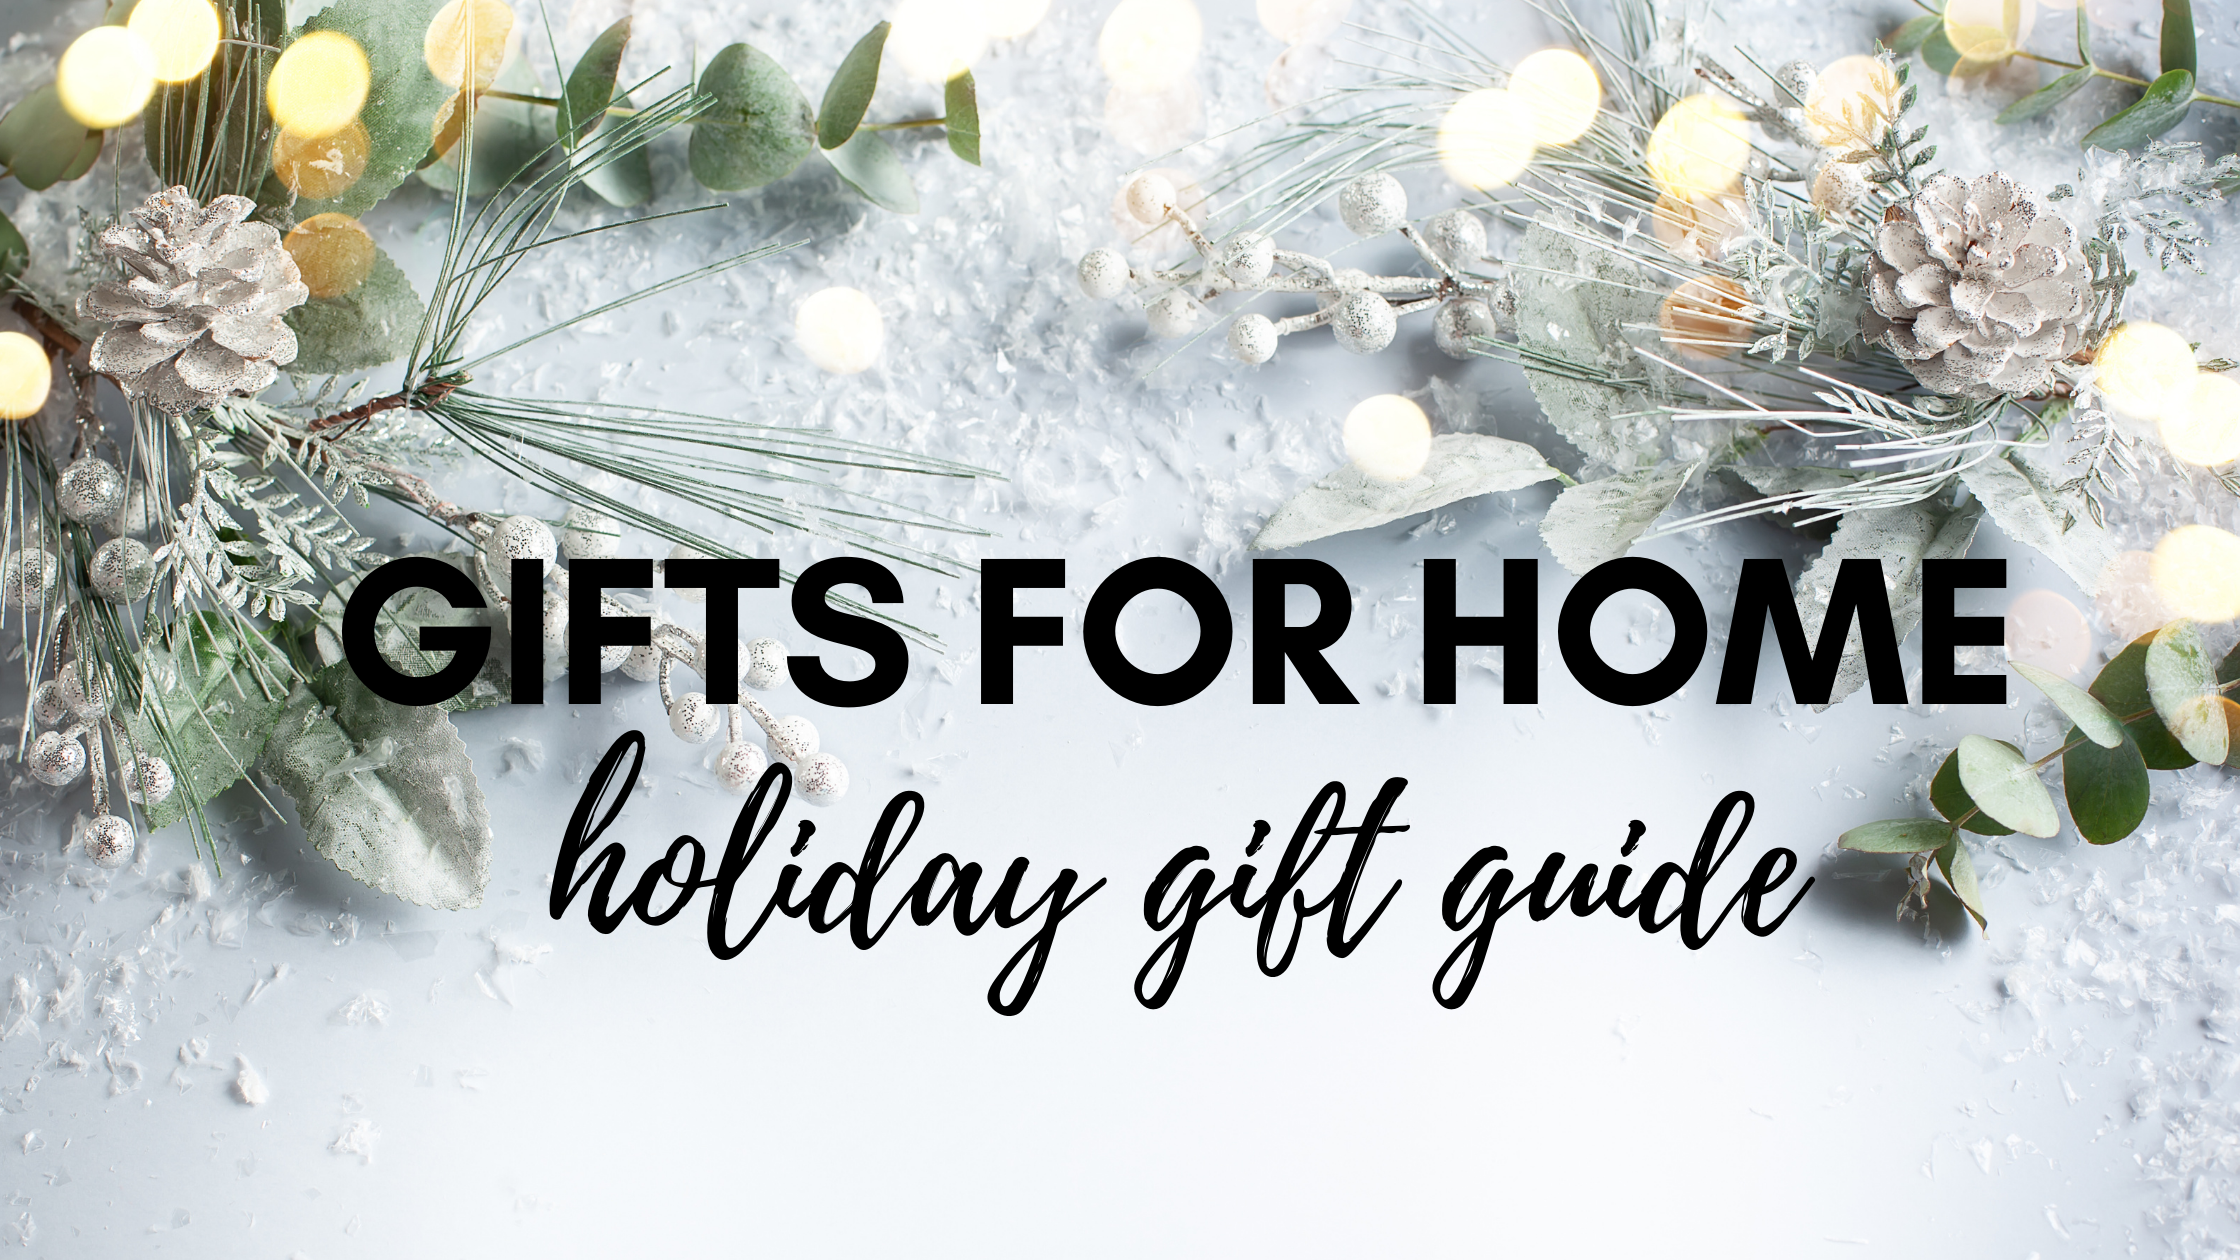 2020 Holiday Gift Guide, gifts for home